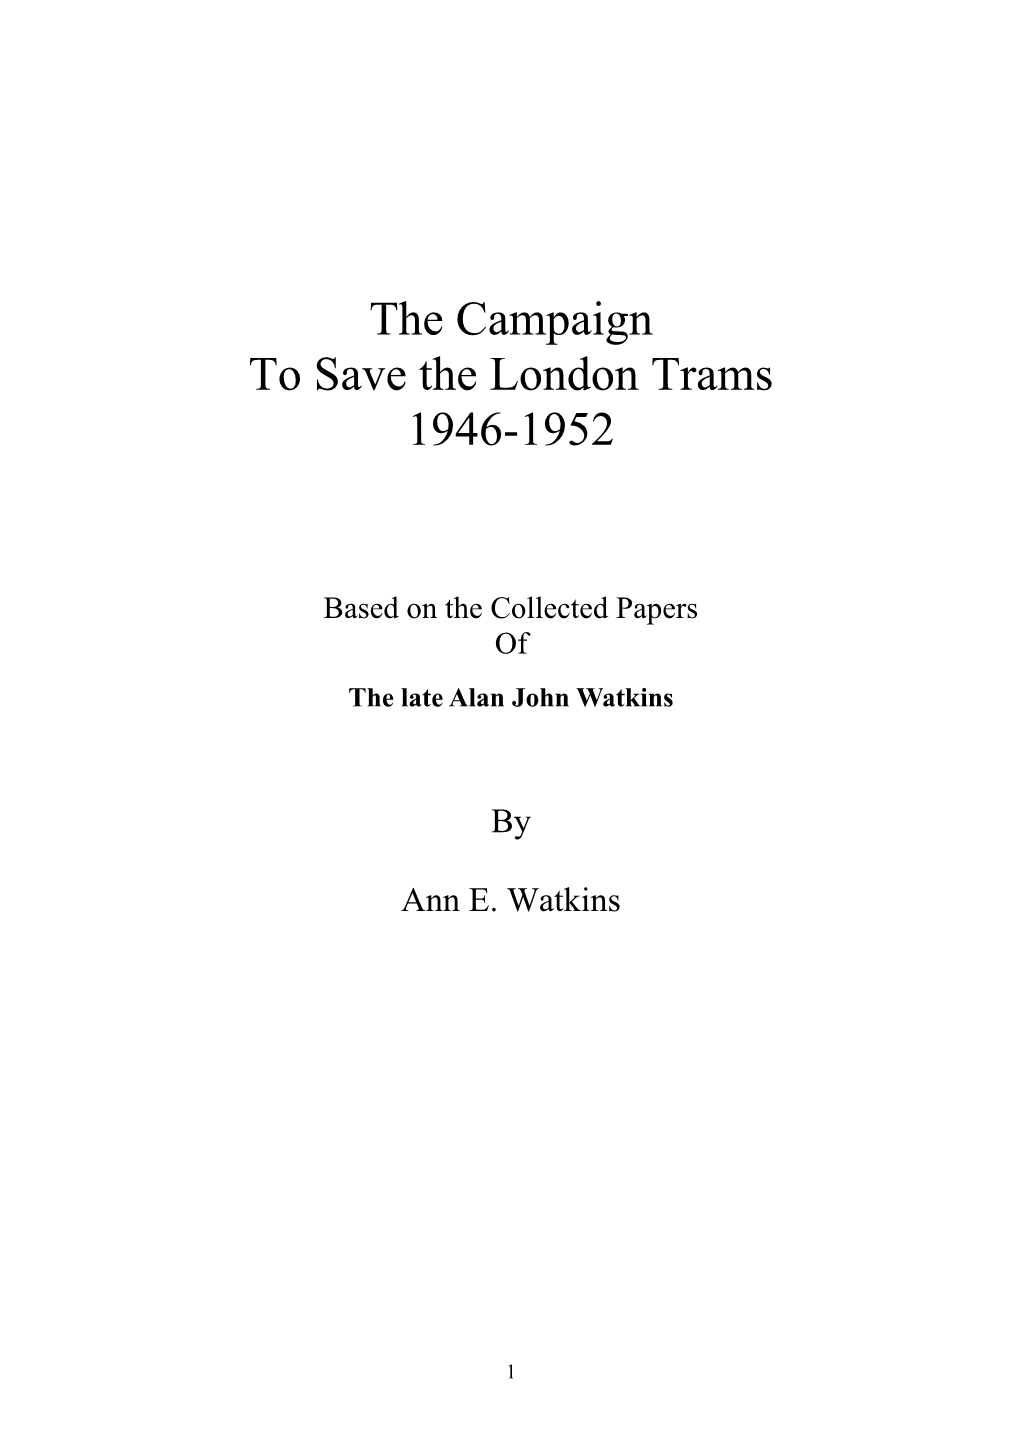 The Save the London Trams Campaign: 1946-1952